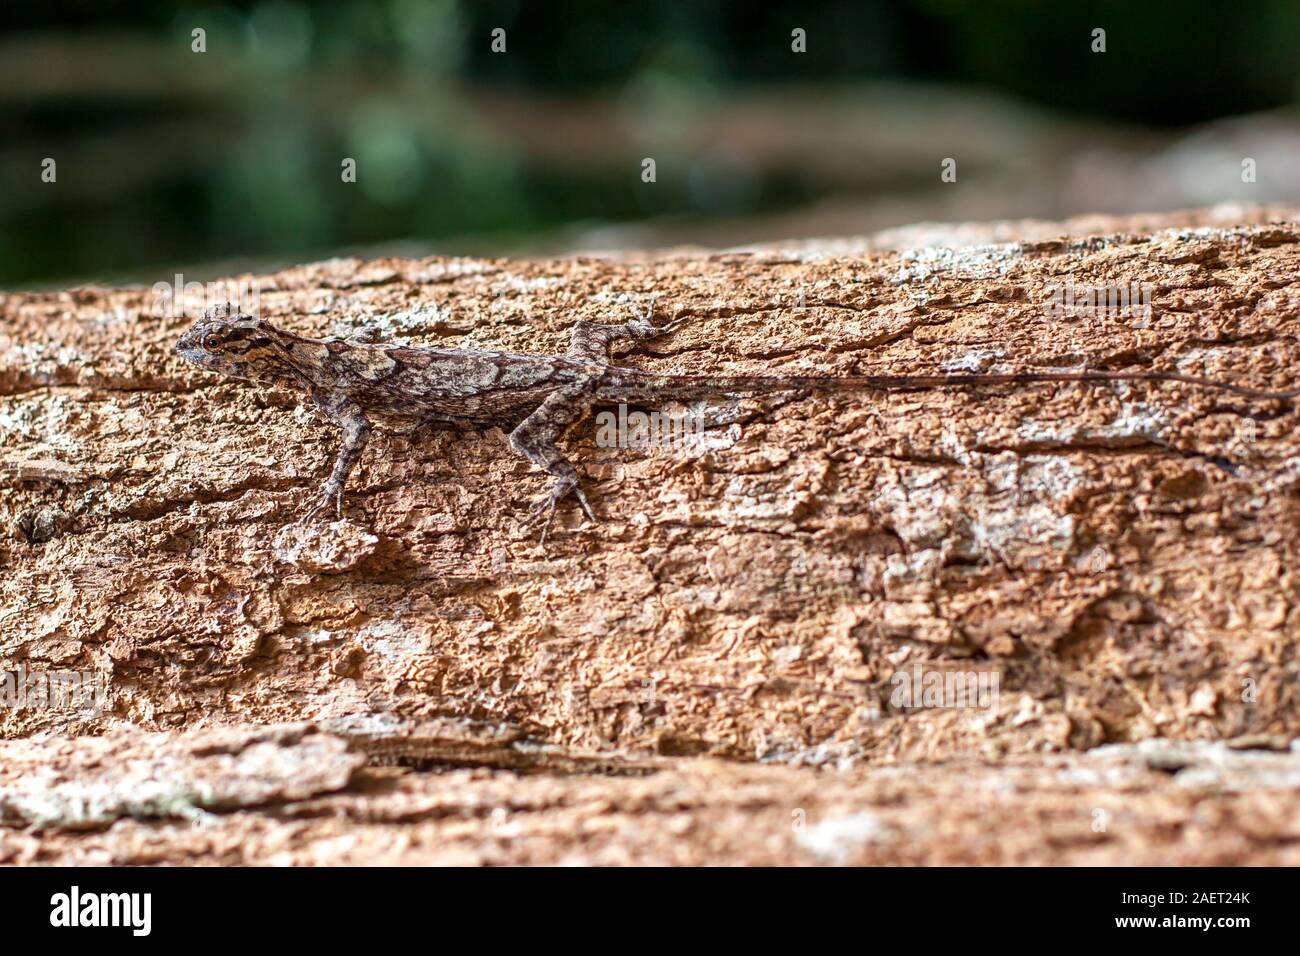 The lizard disguises itself on a tree trunk and is almost invisible. Spotted skin like a tree bark. A long tail. Selective focus on the head. Stock Photo